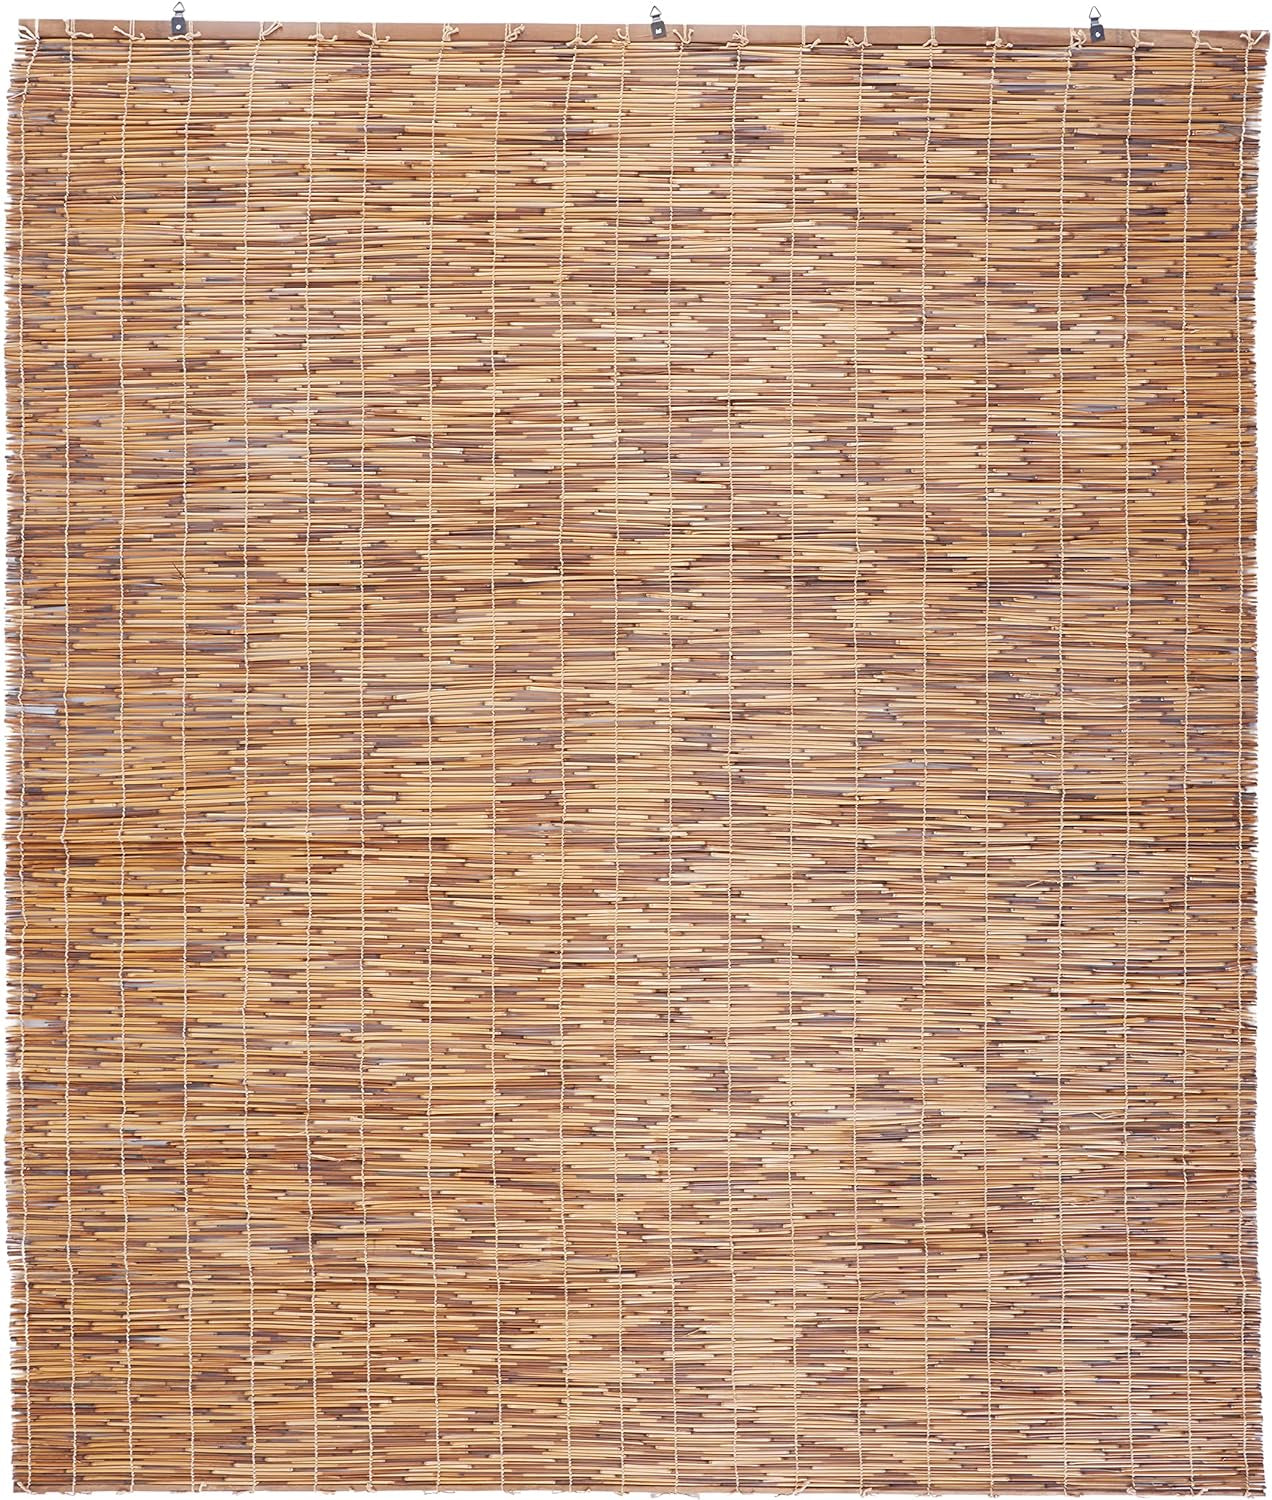 Backyard X-Scapes Light-Filtering Cord-Free Bamboo Reed Roll-Up Blind Shades for Windows Manual Roman Blinds Coffee 48 in W X 72 in H